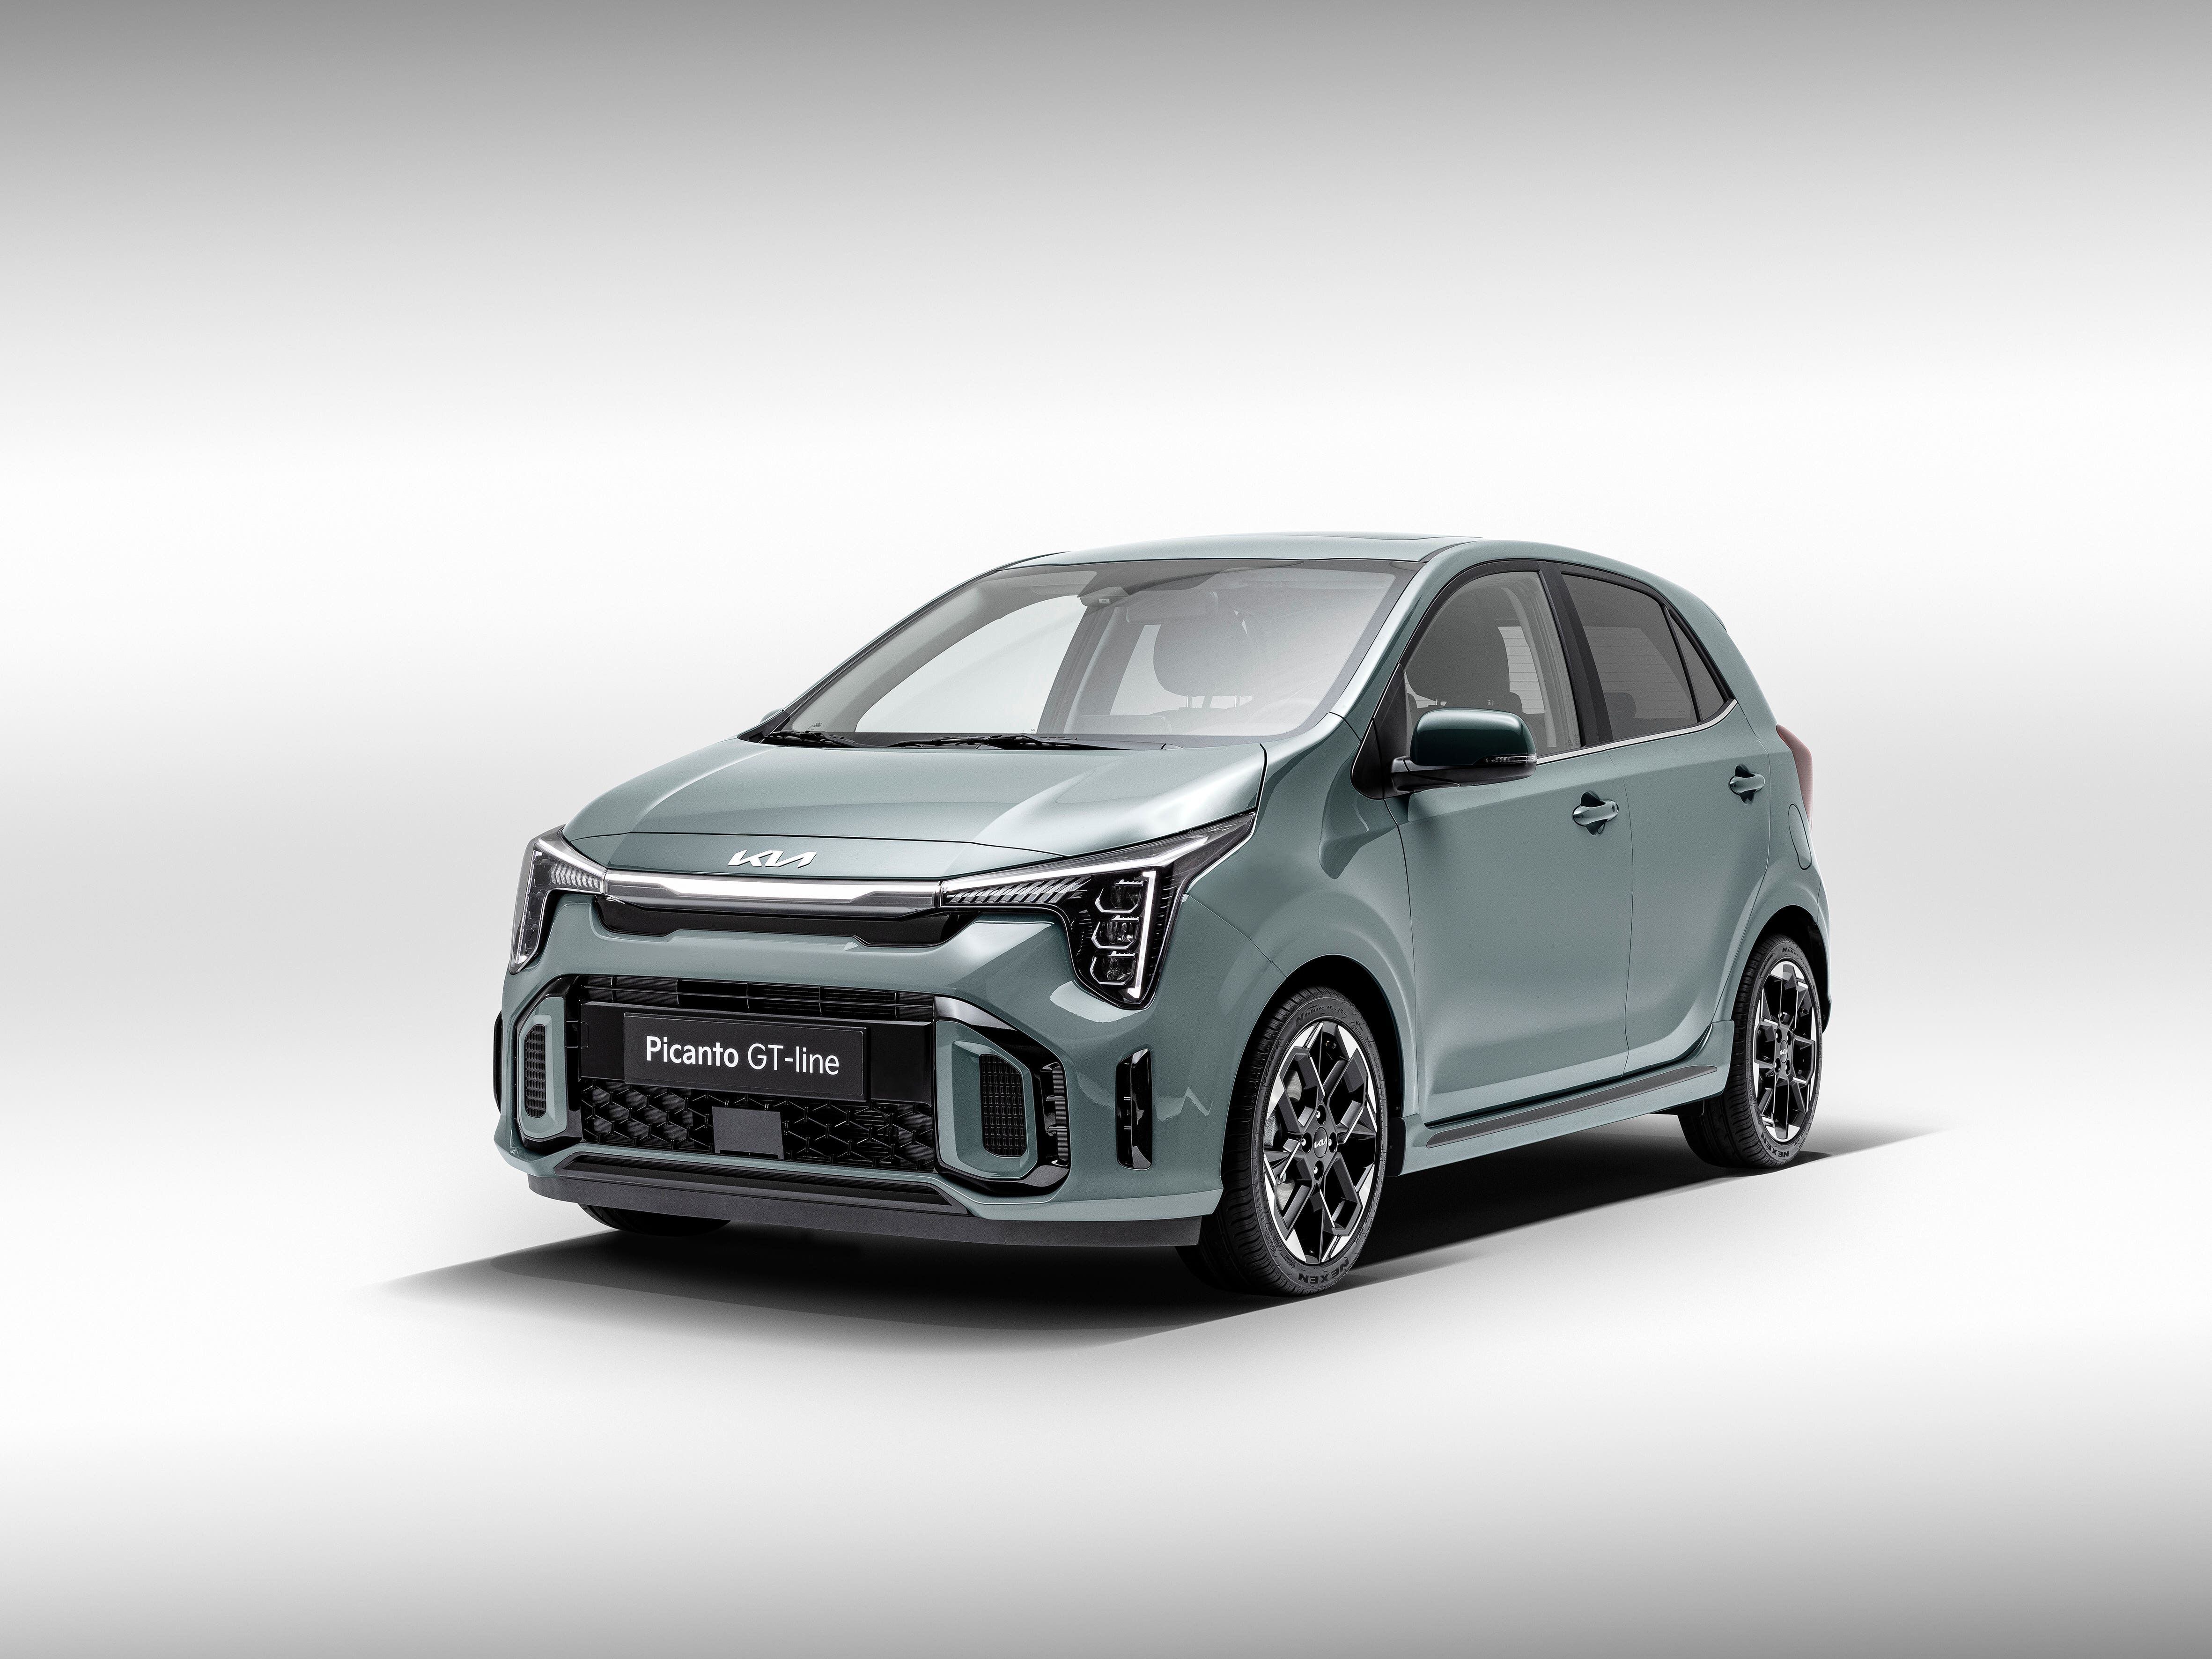 Kia’s new Picanto hits the road priced from £15,595